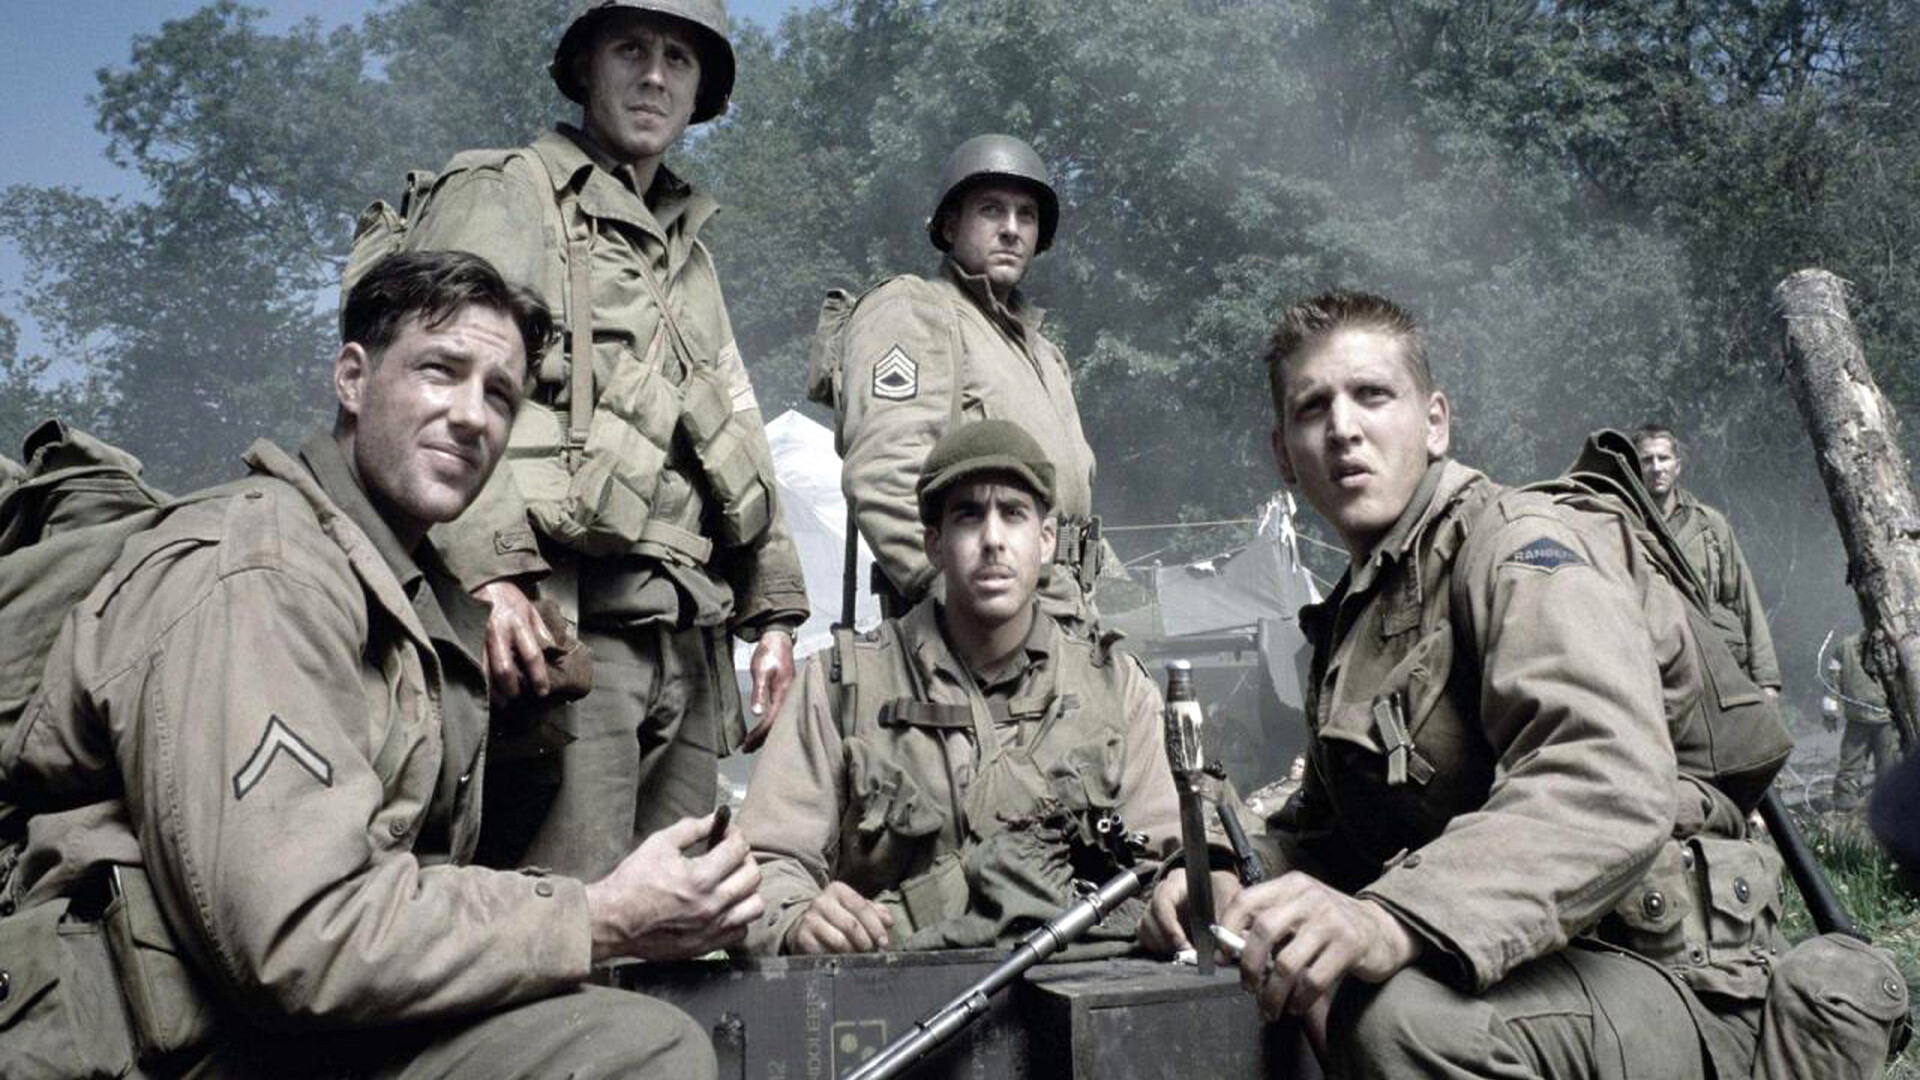 Saving Private Ryan: On its release, the film became the second highest-grossing film of 1998 worldwide. 1920x1080 Full HD Background.